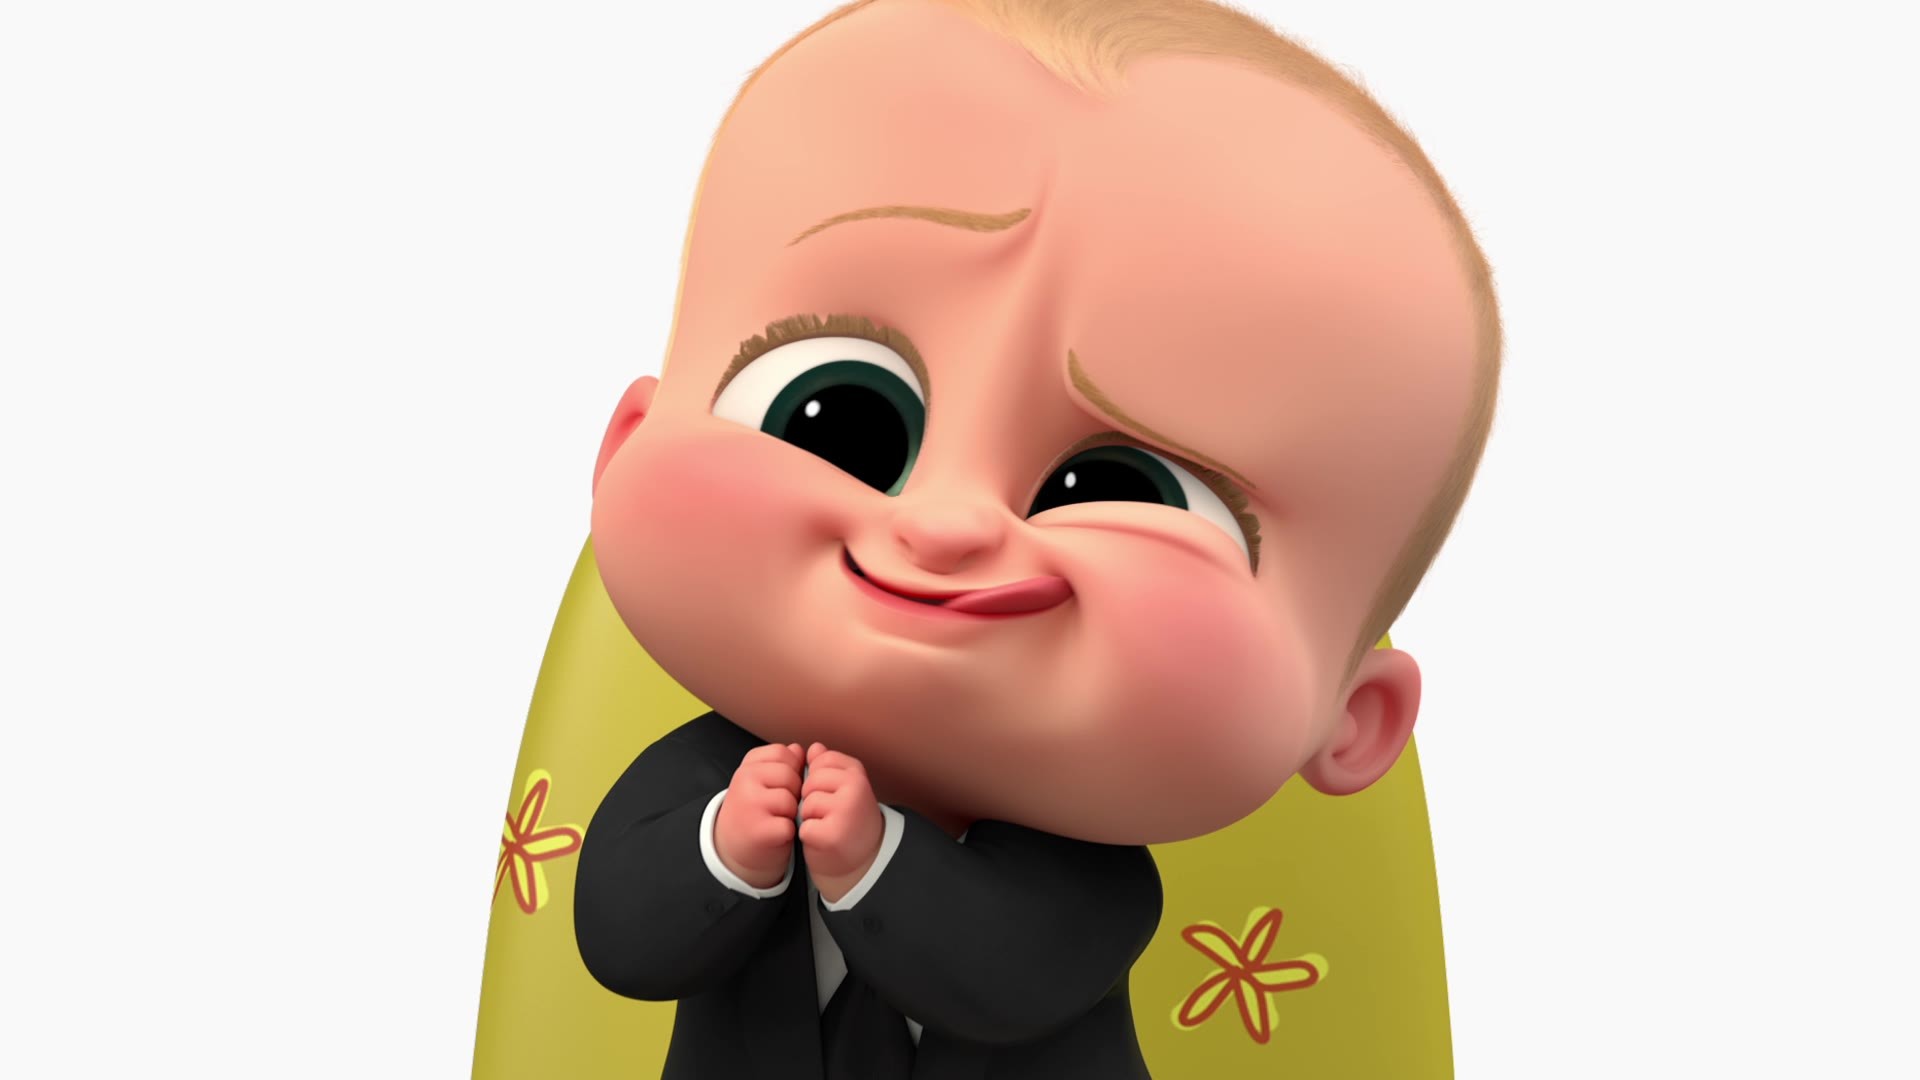 Desktop Wallpaper The Boss Baby, Baby, Animation Movie, 2017 Movie, Hd  Image, Picture, Background, 7znh 6